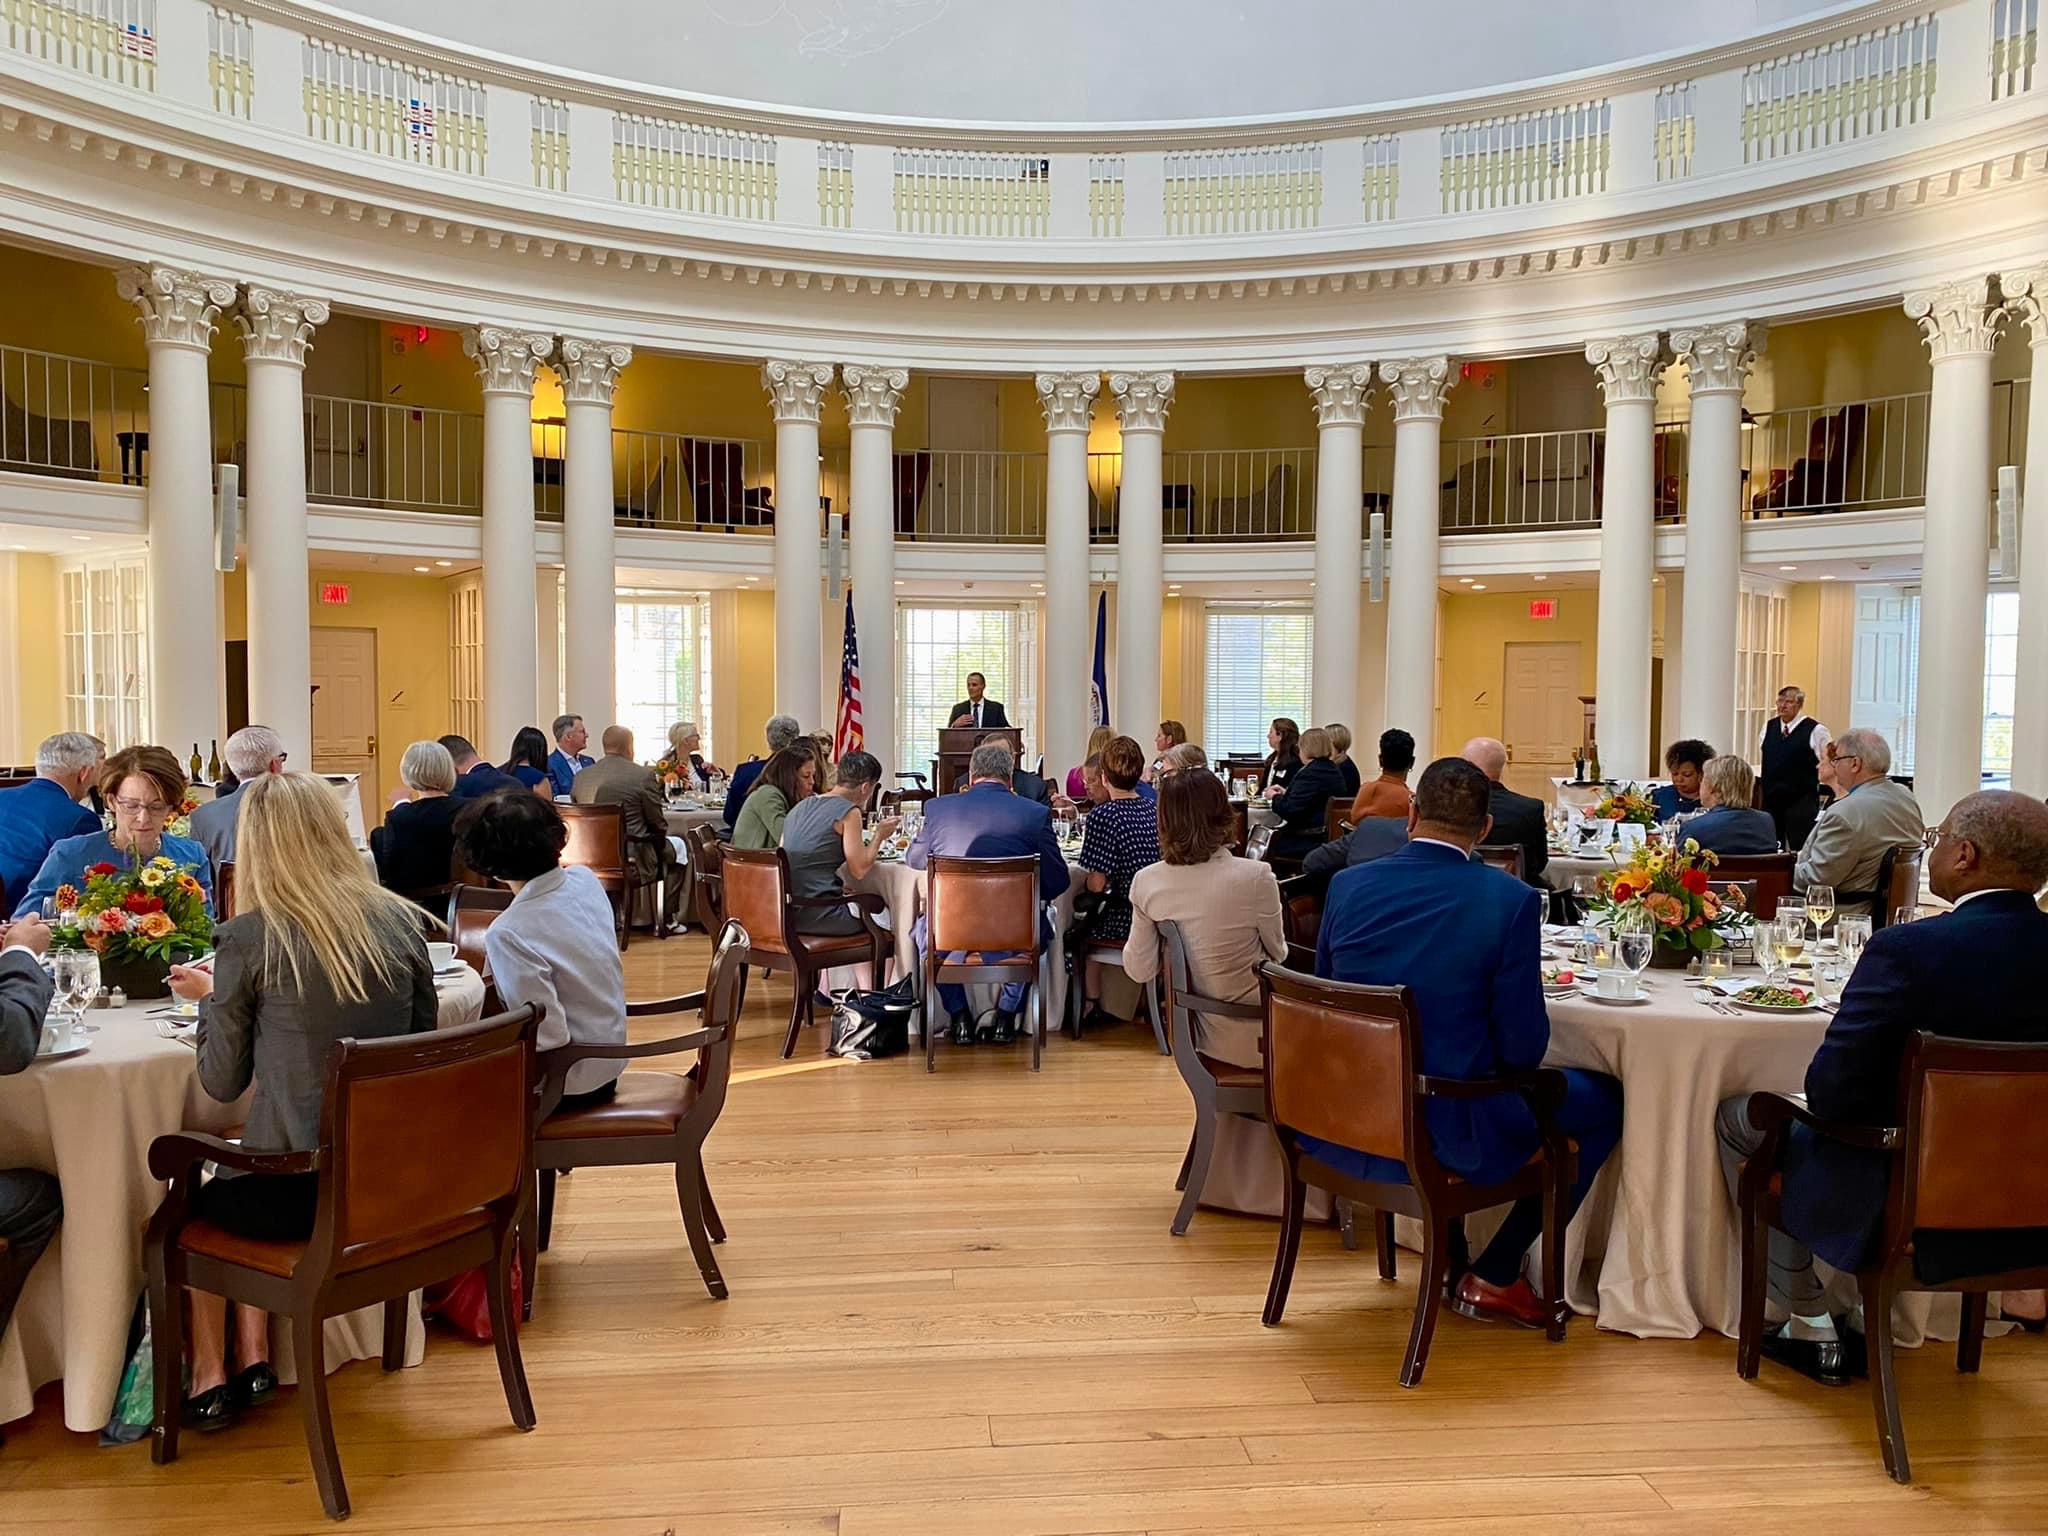 Members of the State Council of Higher Education for Virginia and the Council of Presidents dine with UVA leaders in the Dome Room